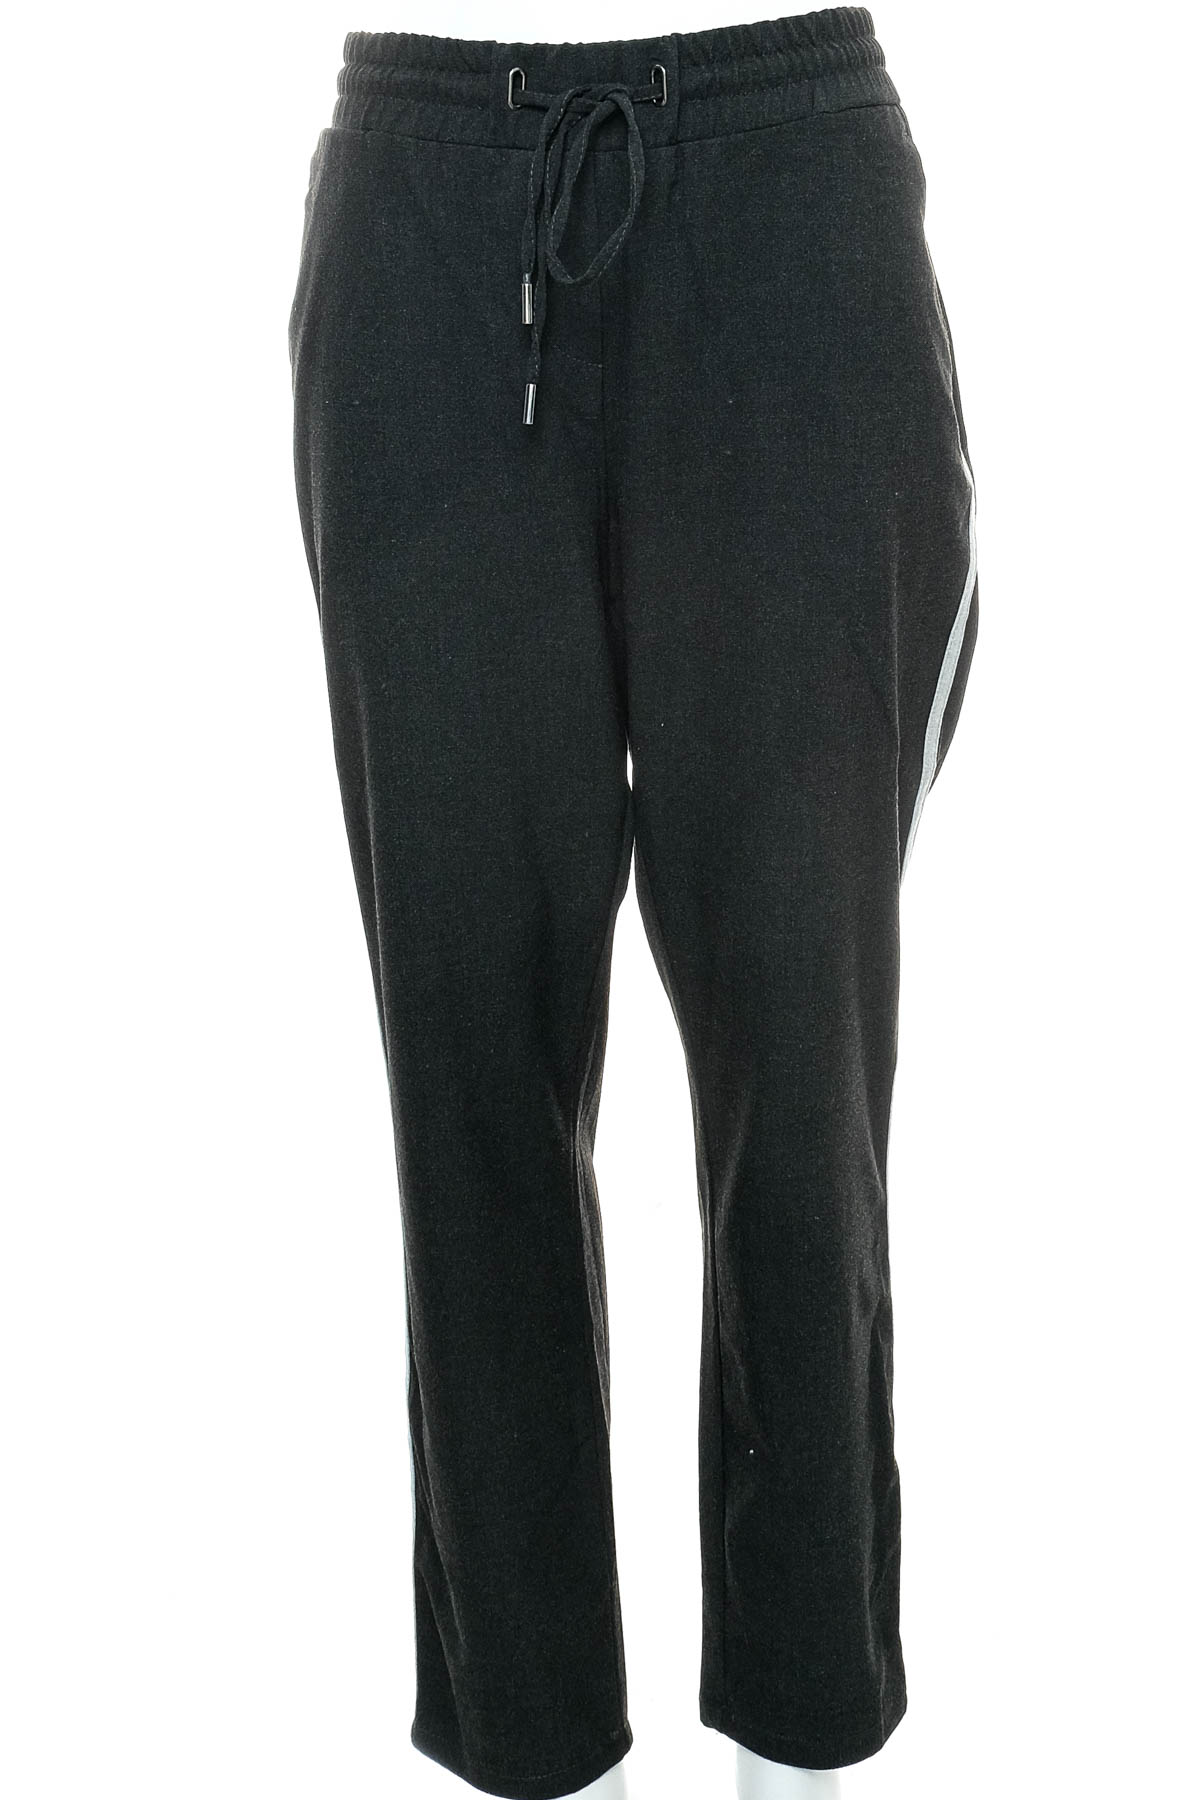 Women's trousers - CECIL - 0